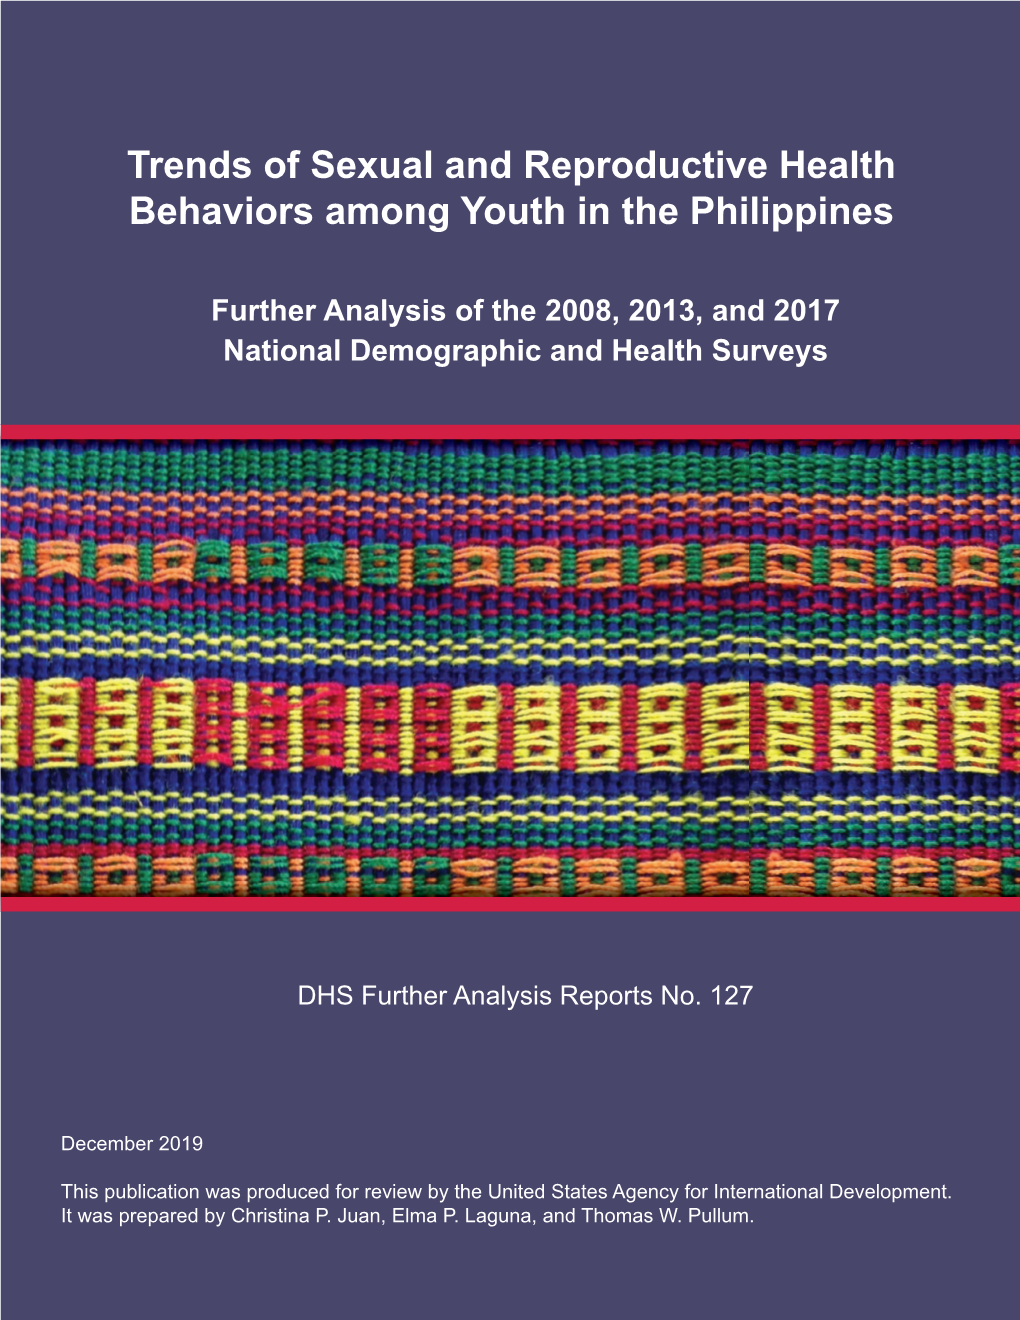 Trends of Sexual and Reproductive Health Behaviors Among Youth in the Philippines